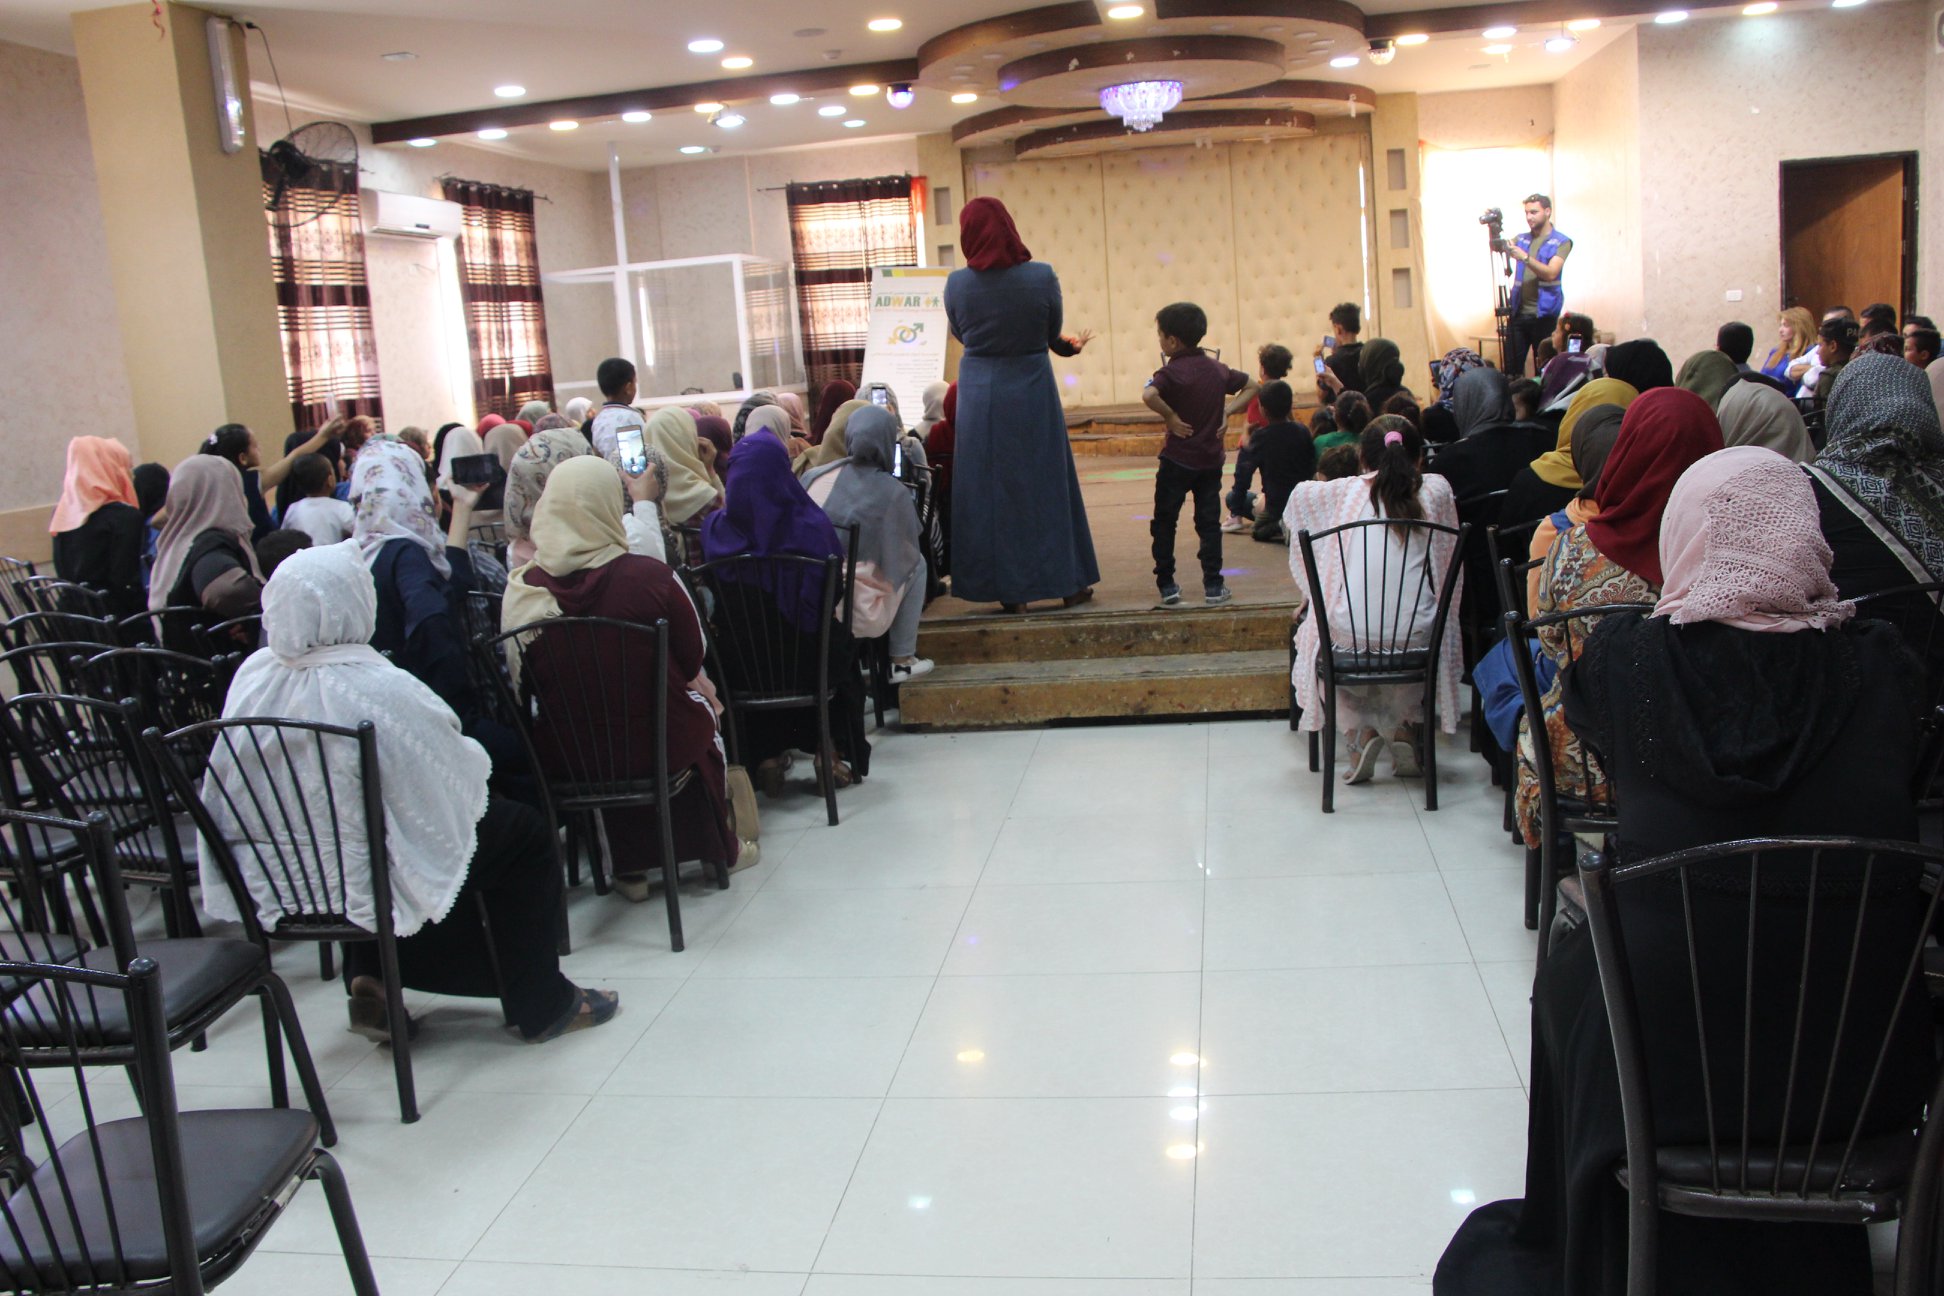  The Community Center of Ethena – Athena – Hebron Roles for Social Change Association-ADWAR in cooperation with Community Center